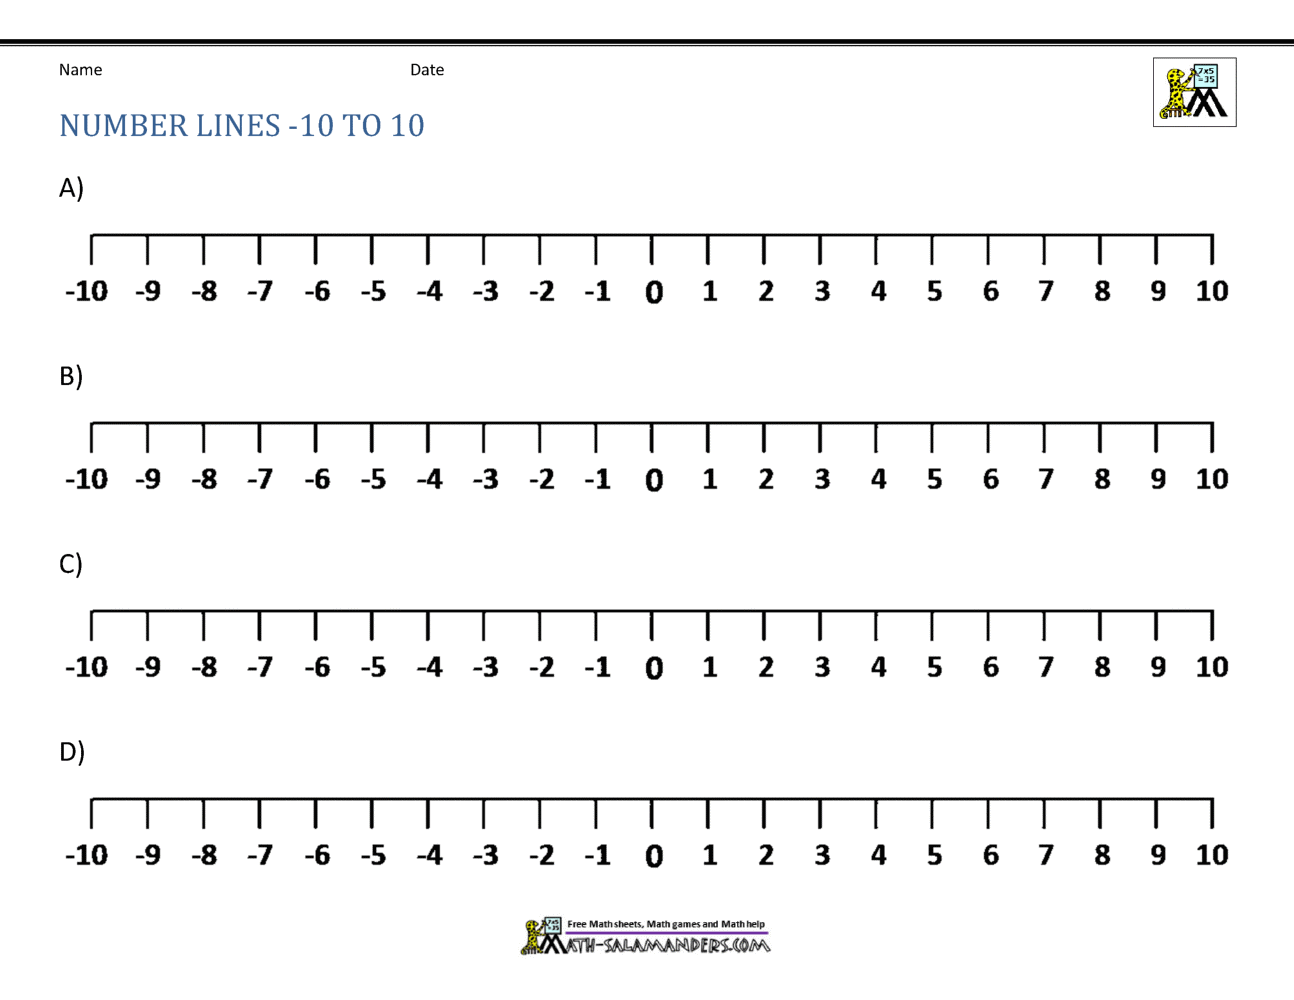 Number Line with Negative numbers